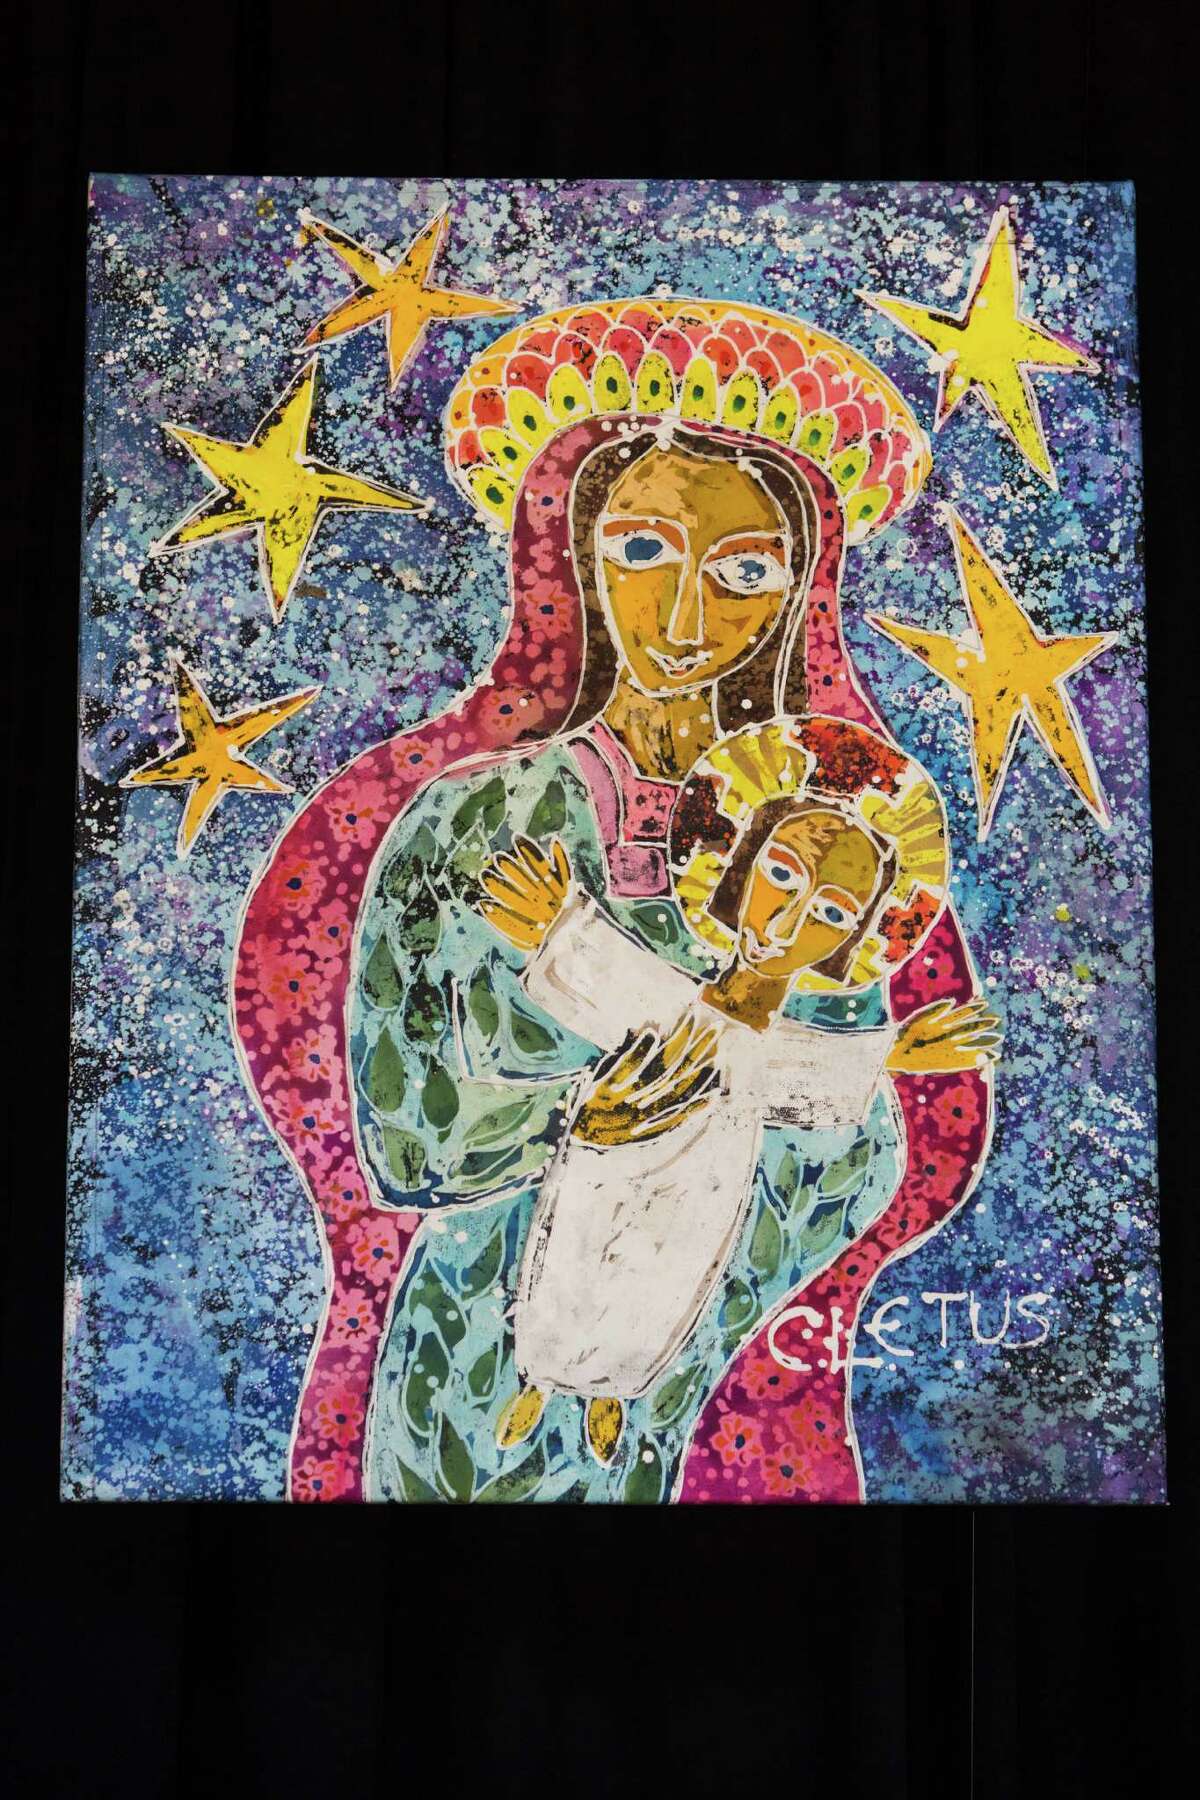 "Mother and Child" by Brother Cletus Behlmann sits on display at St. Mary's University President Mengler's home in San Antonio, Texas on October 6, 2015. St. Mary's students and San Antonio artists are showing works about the Saint John's Bible and the theme "Behold, Your Mother."